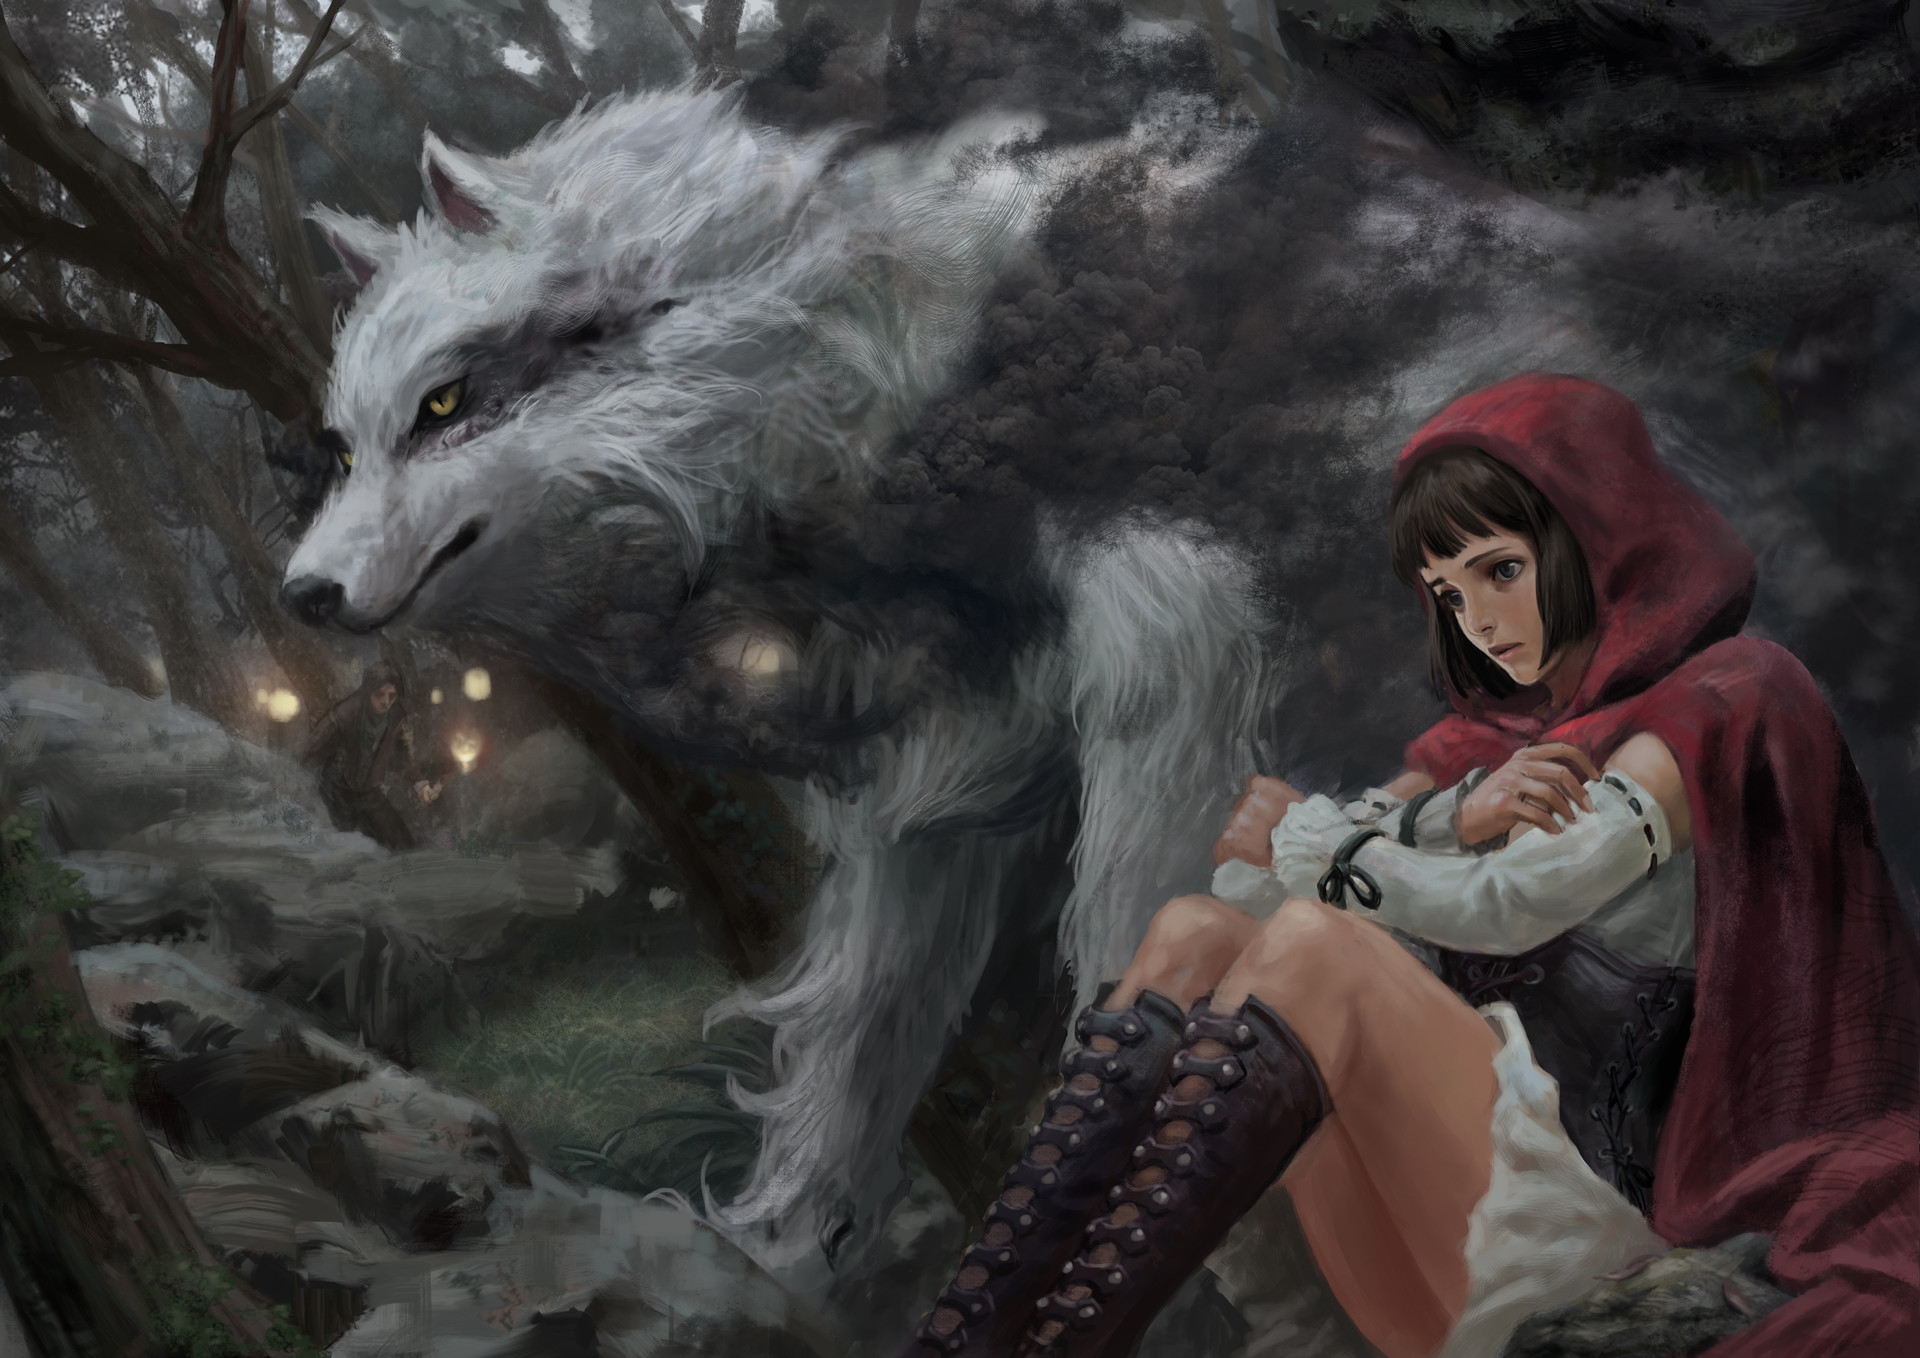 Little Red Riding Hood Wikiwand 1